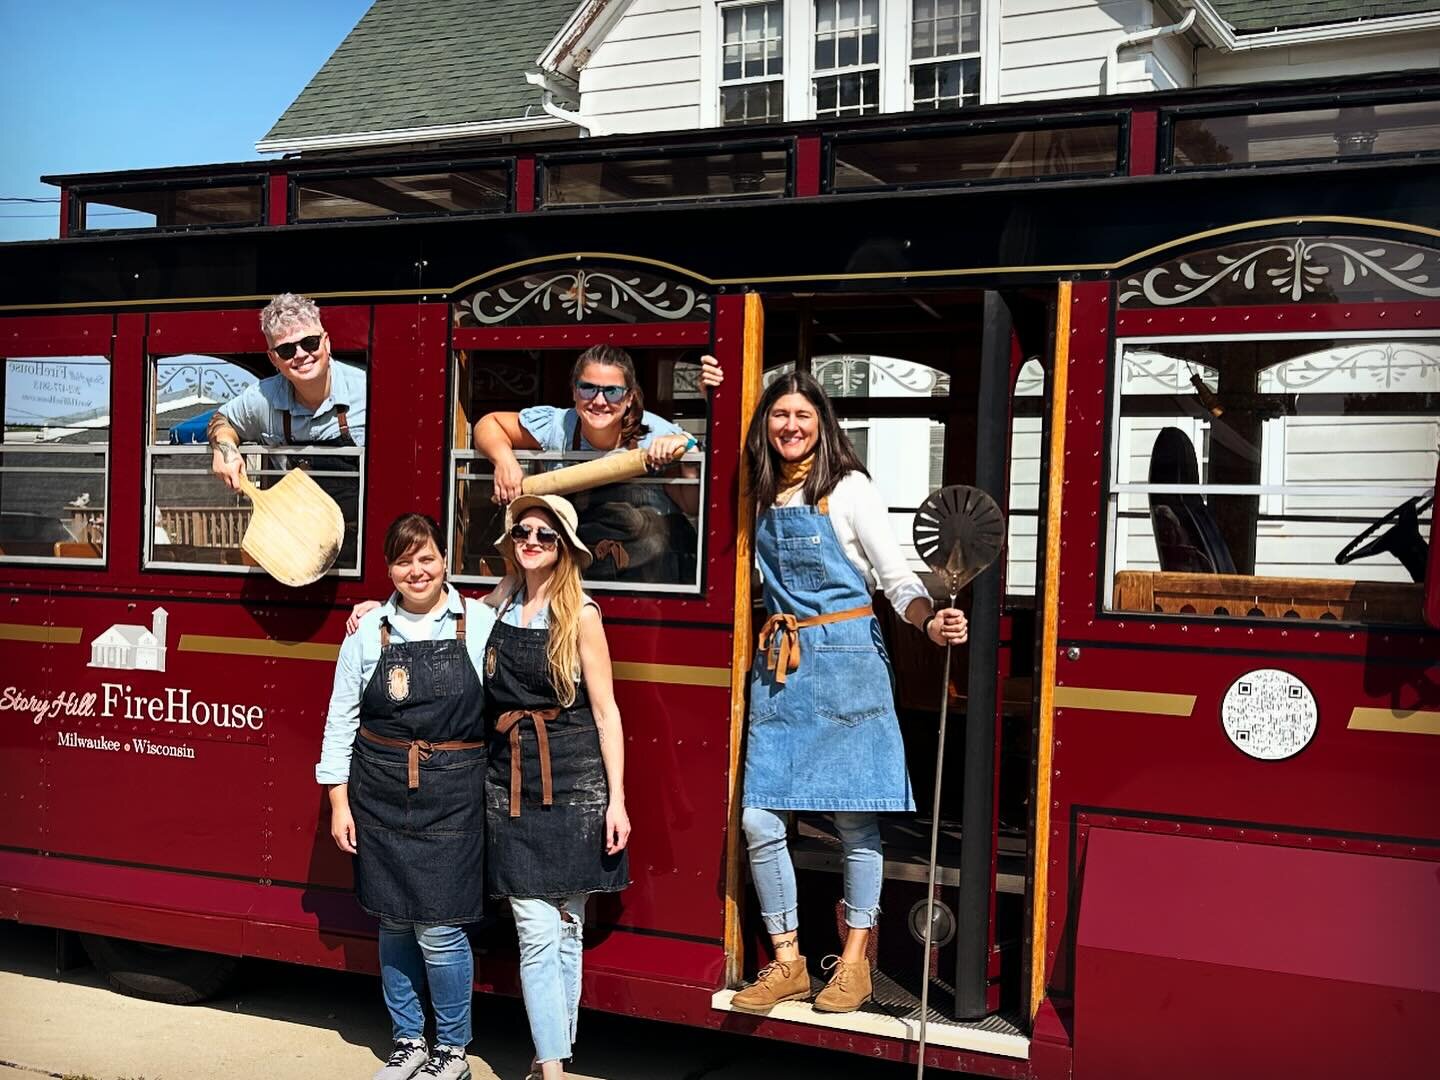 🚋HIRING🚋

We&rsquo;re looking for some really solid peeps to ride a trolley with us for the summer. It&rsquo;ll be mostly fun, hot, lots of heavy lifting. 

Honestly, looking for renaissance folk, hardworking, hardcore, pizza toppers, dough stretch